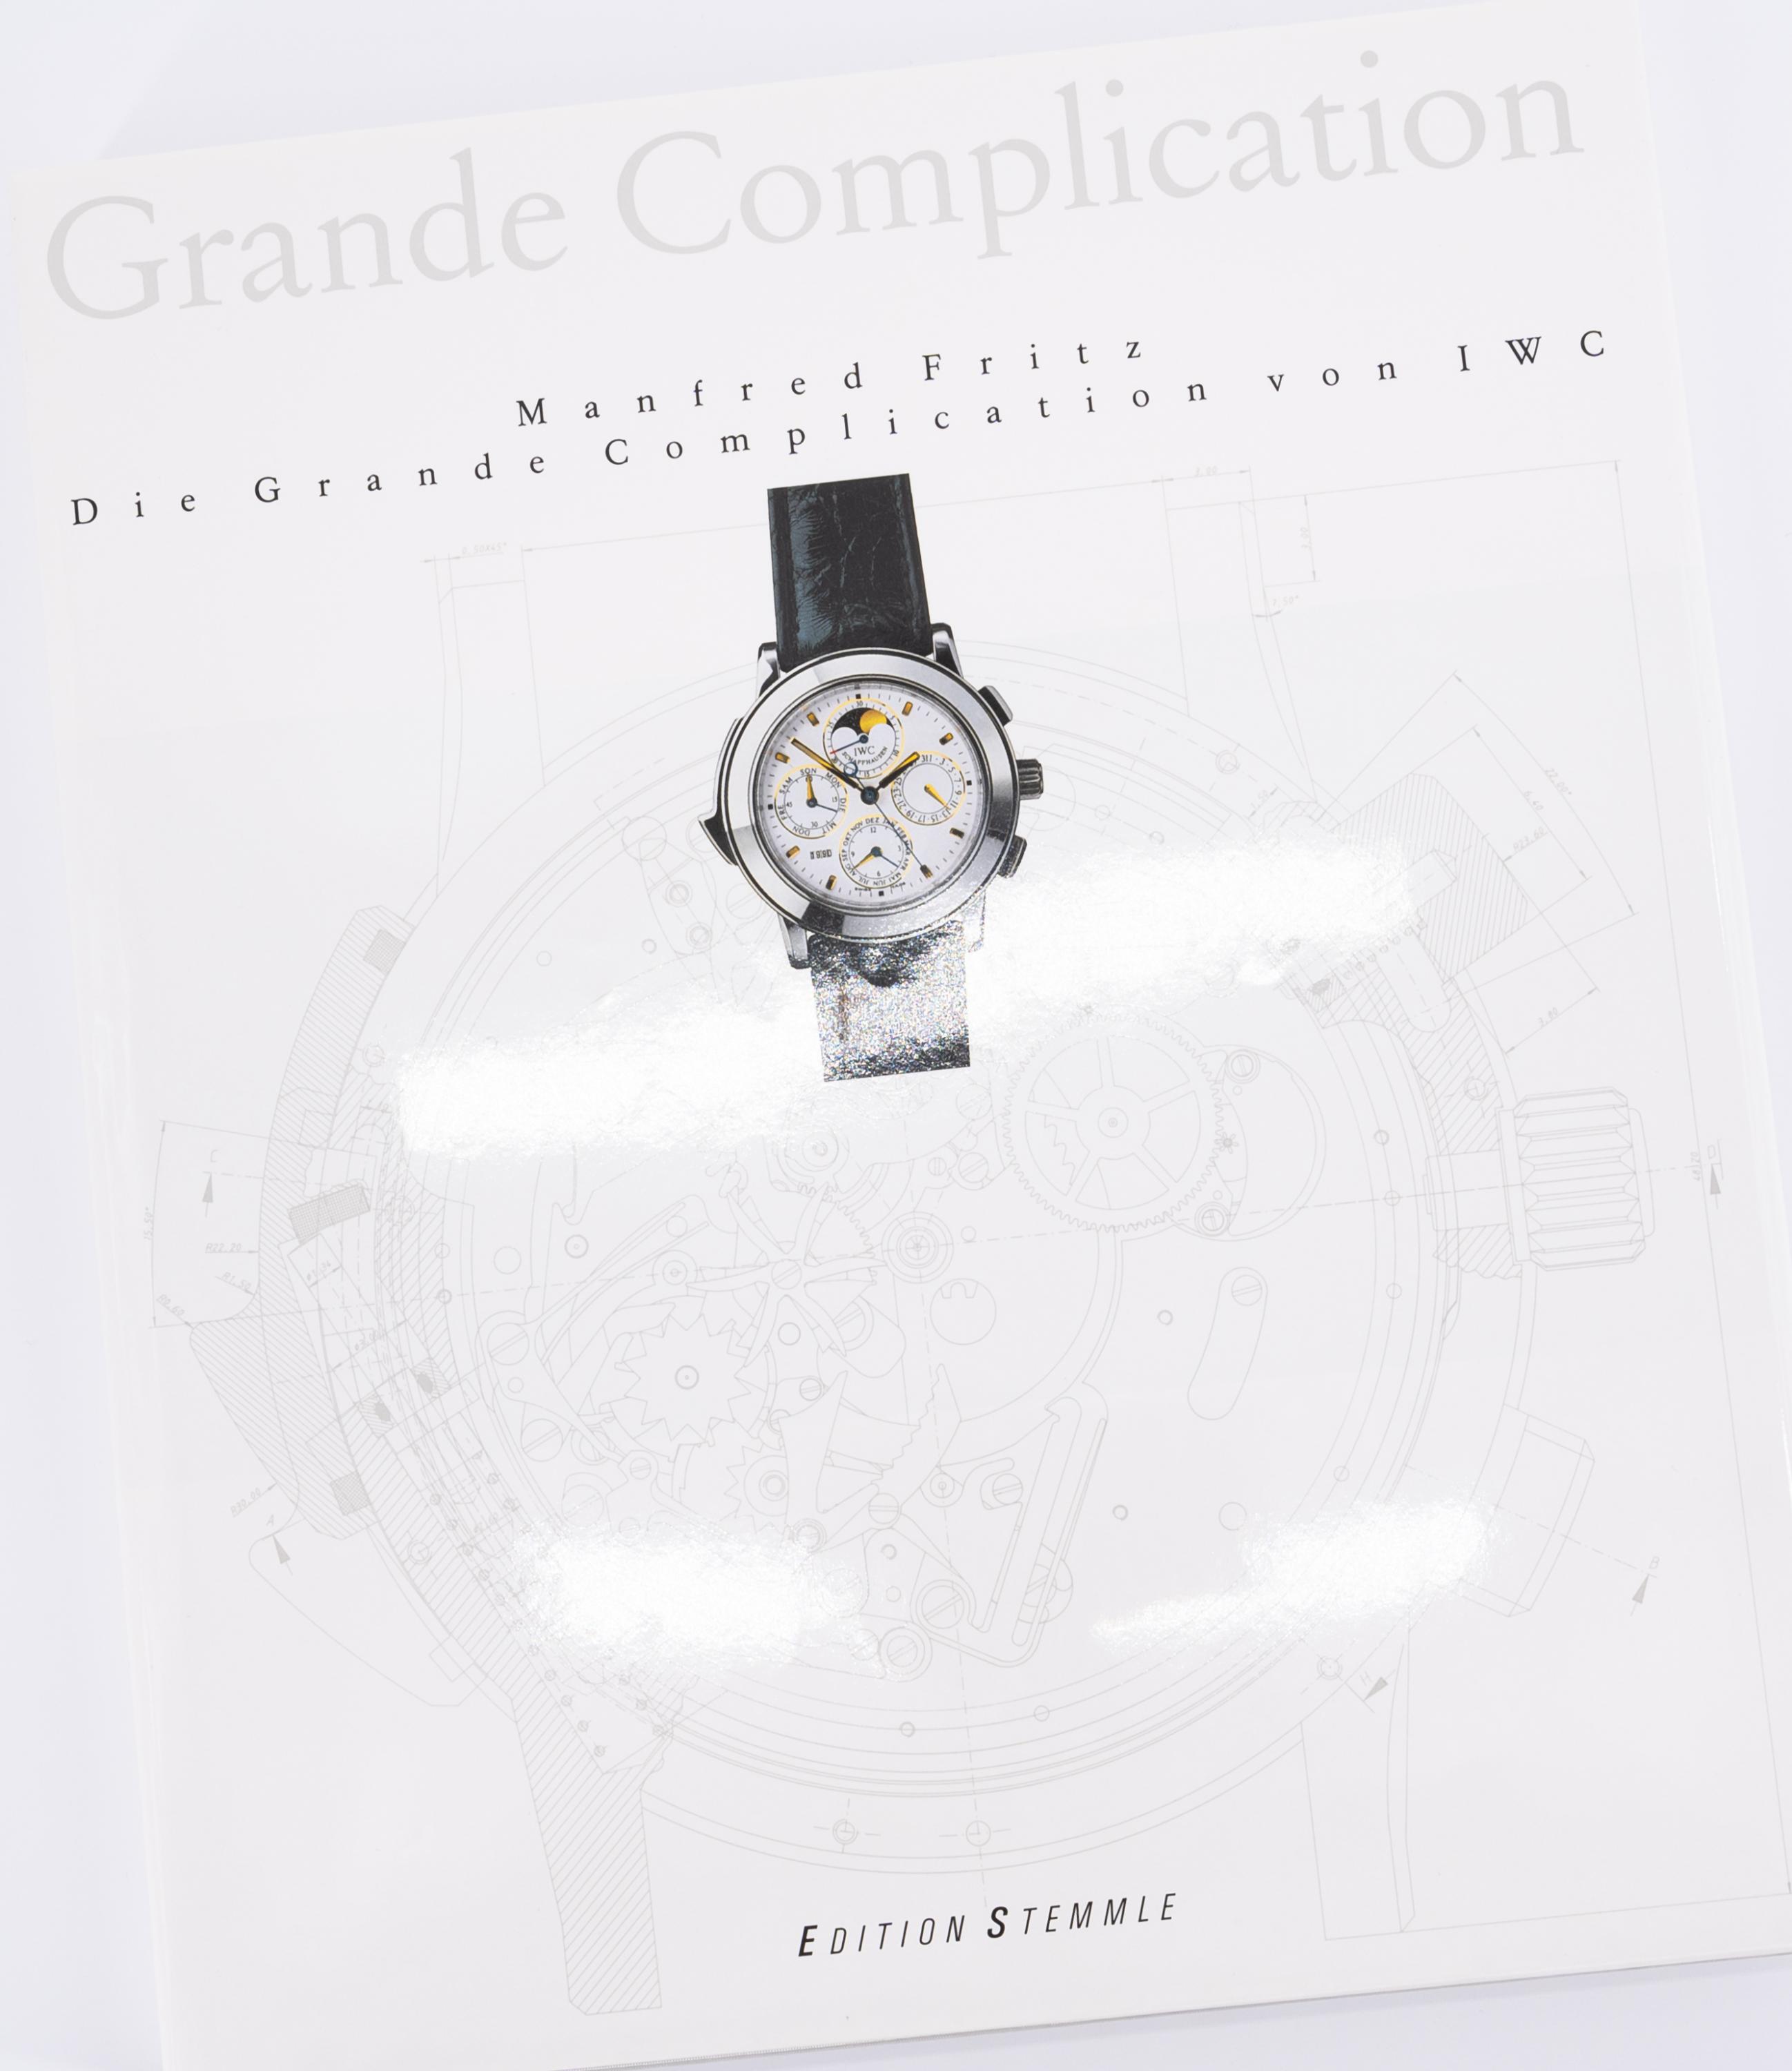 IWC: Grand Complication - Image 7 of 8